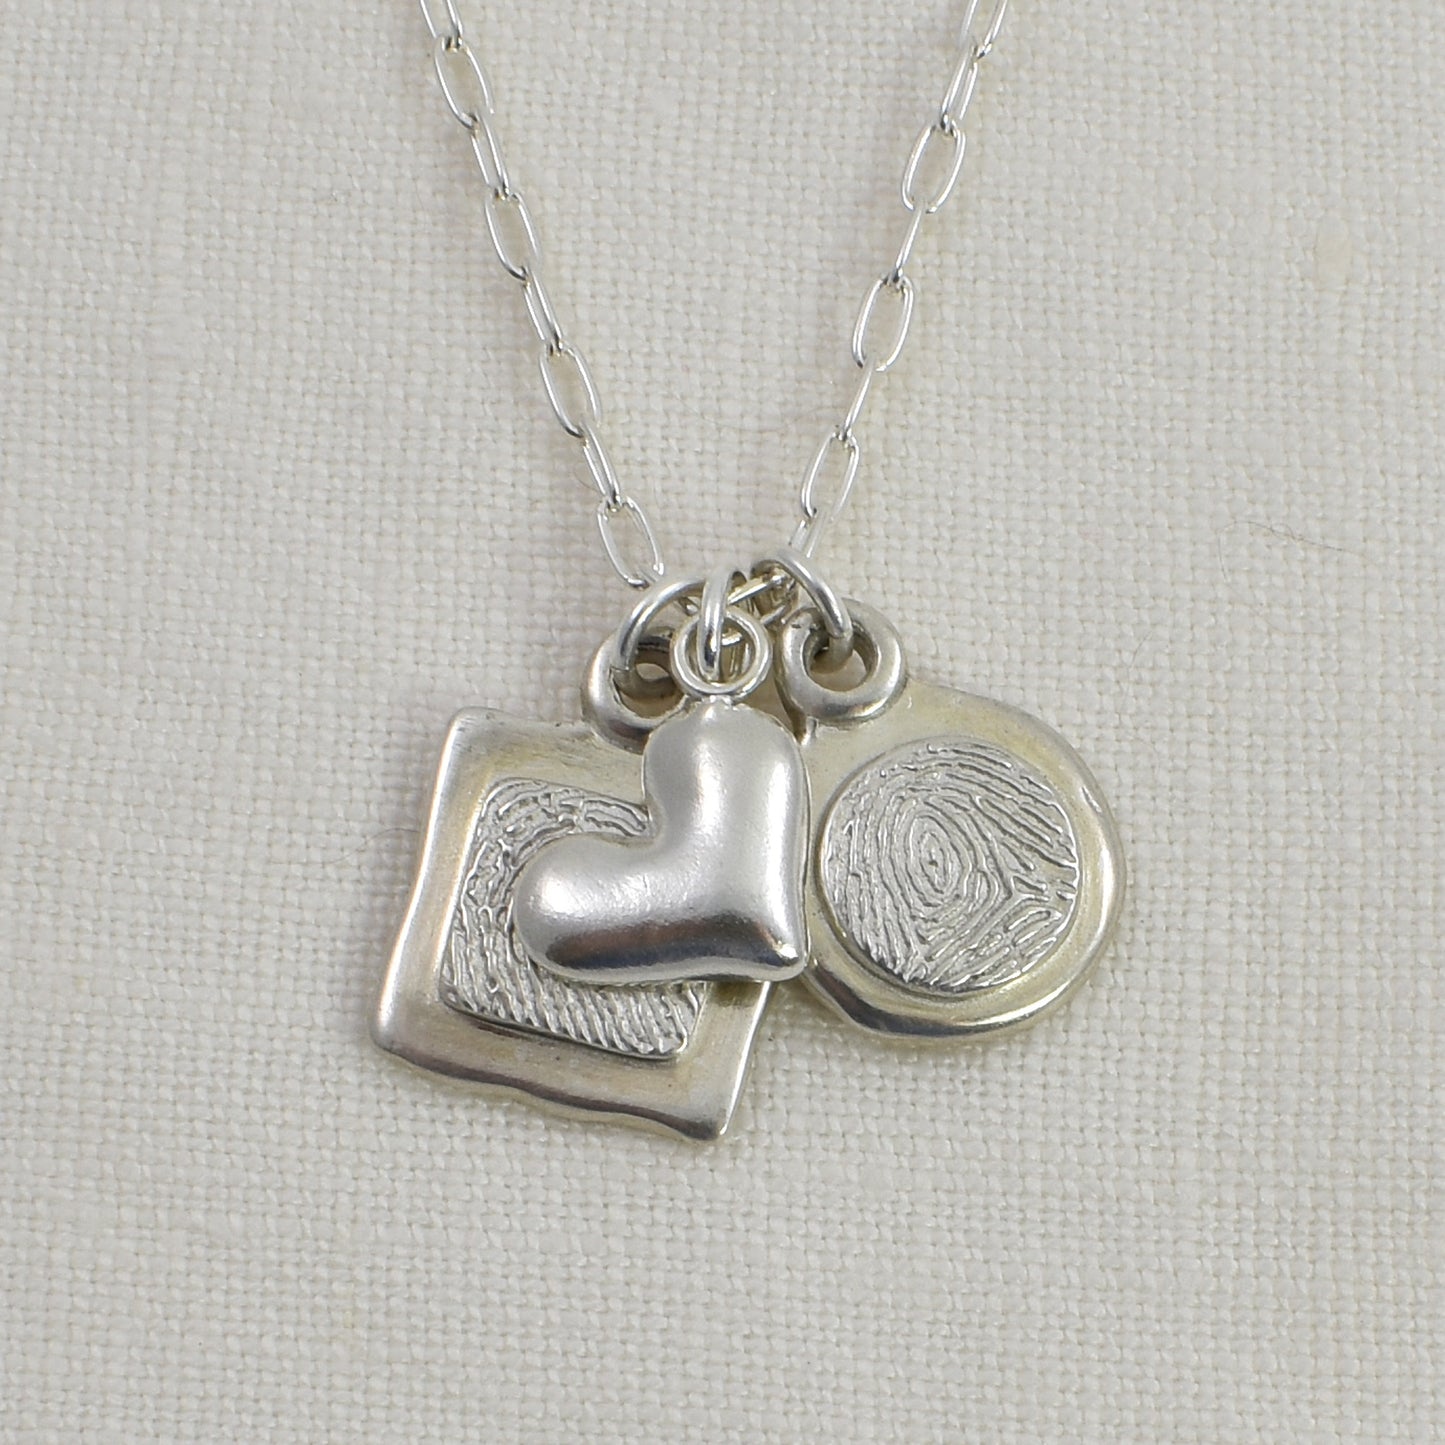 Puffy Heart Symbolic Charm Add On Shown On Fingerprint Necklace